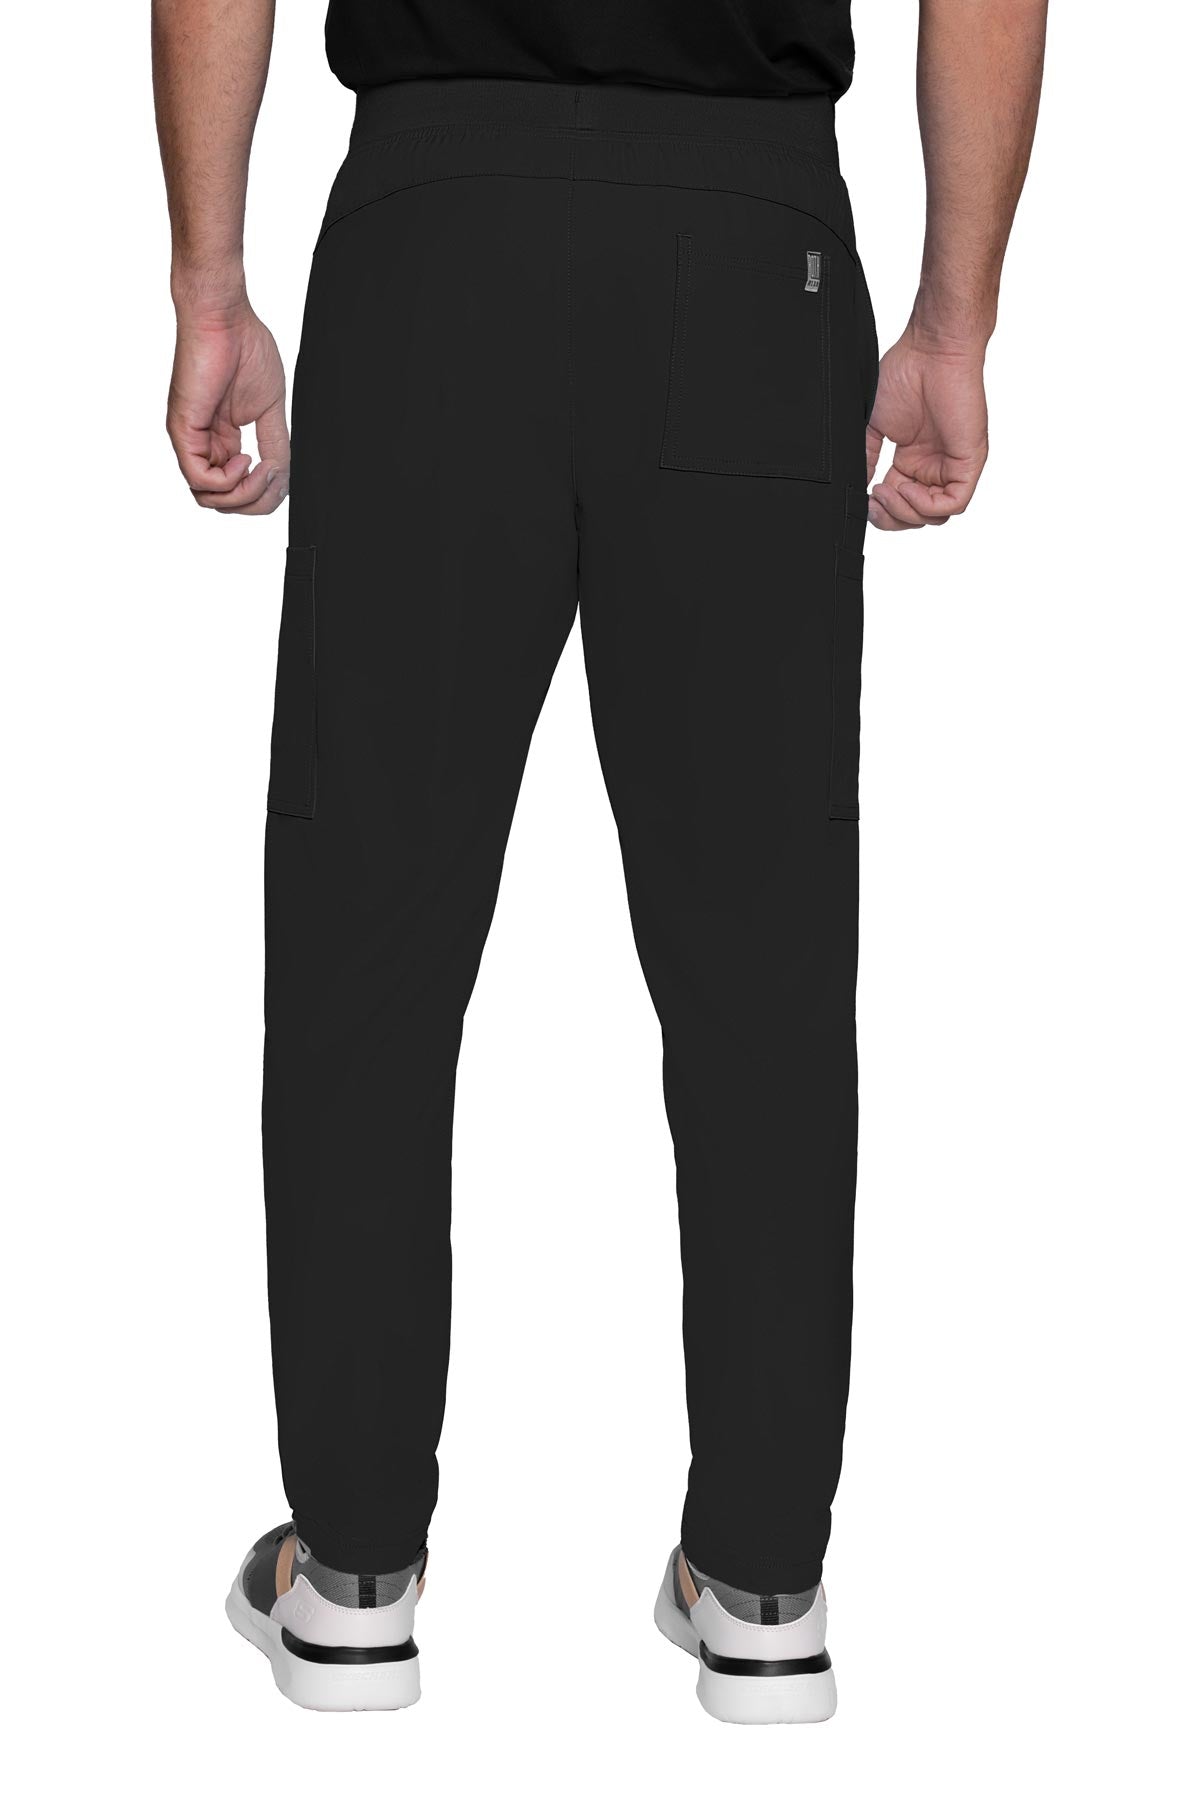 Med Couture Roth Wear Insight 2772 Men's Straight Leg Pant Black Back